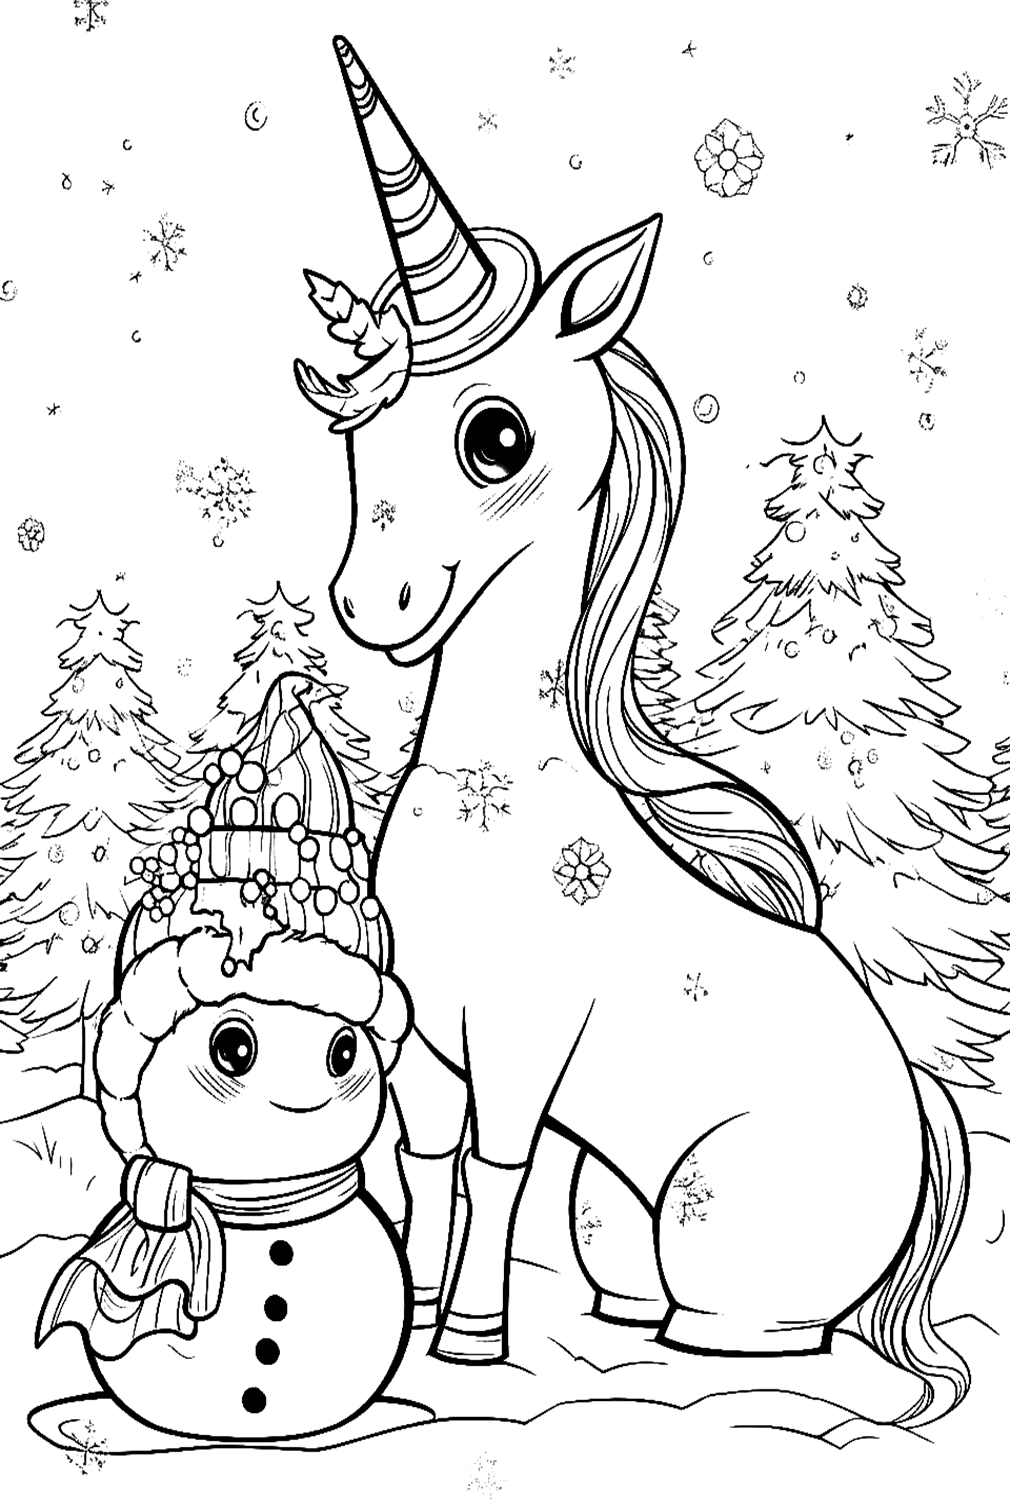 Snowman And Unicorn Coloring Page